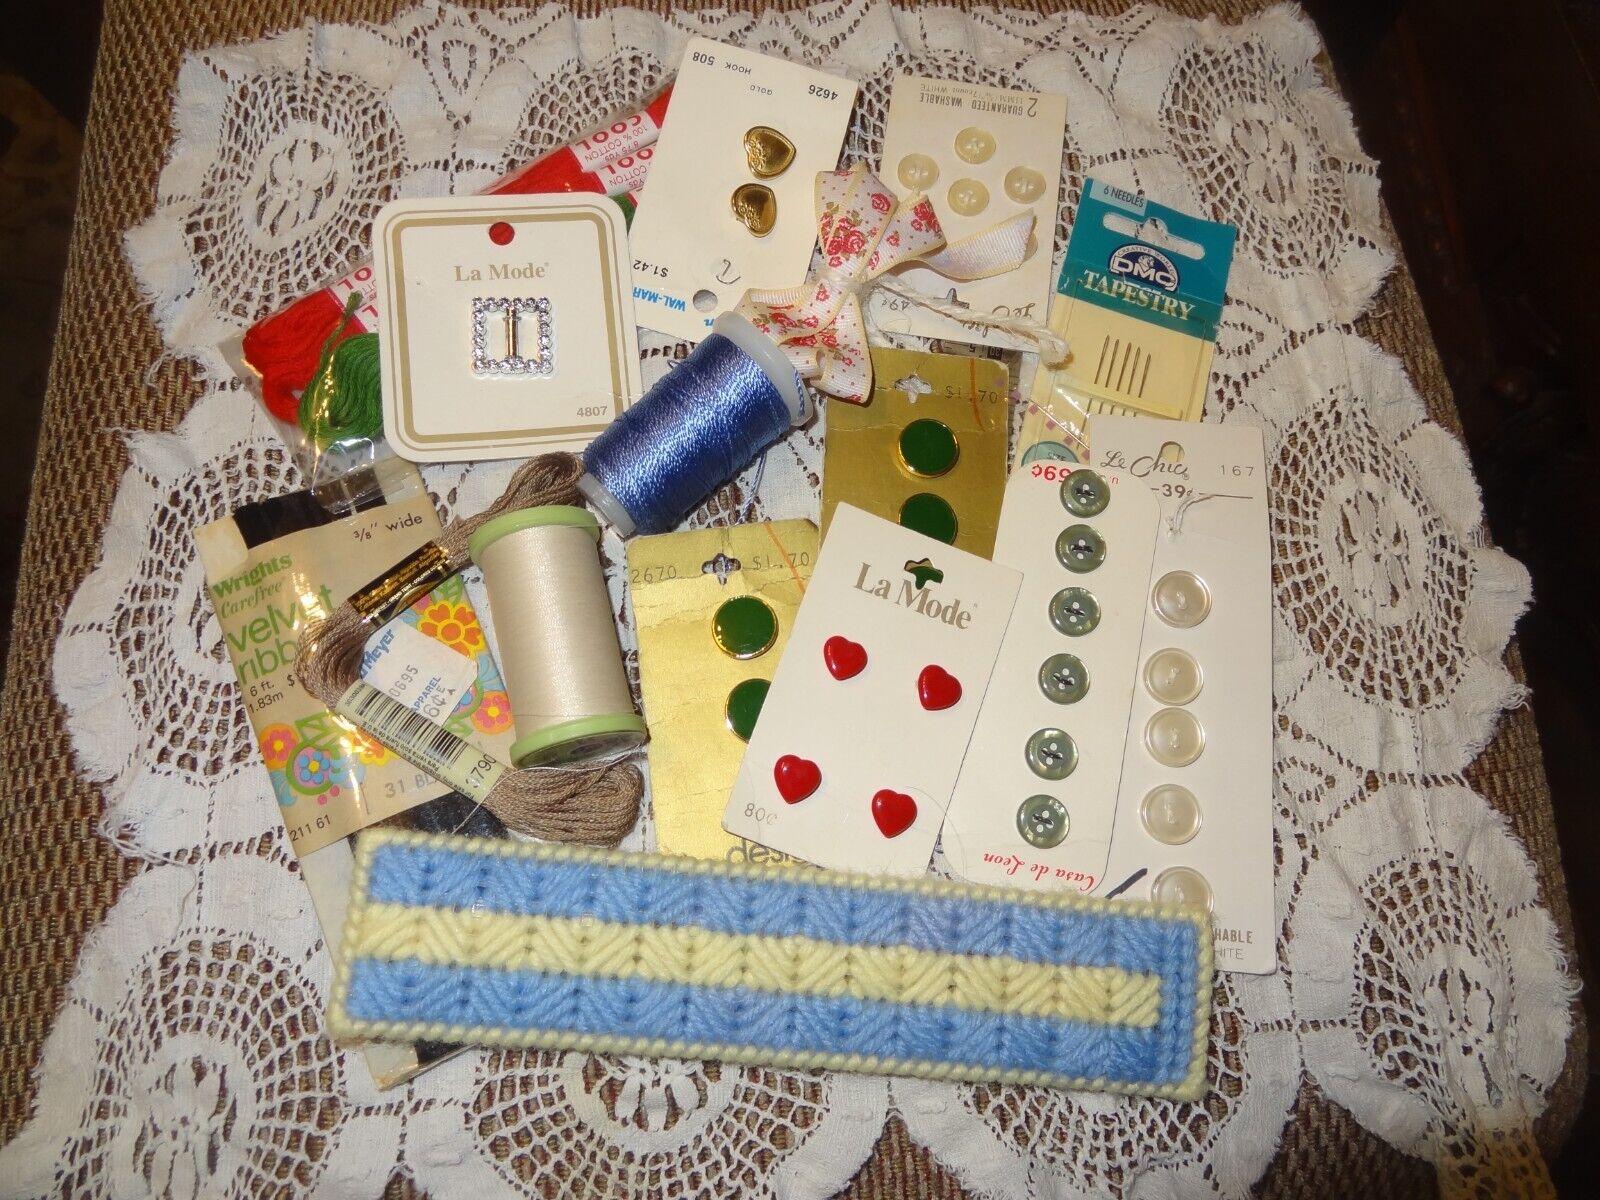 Lot of vintage sewing collectibles from Grandma's sewing drawer